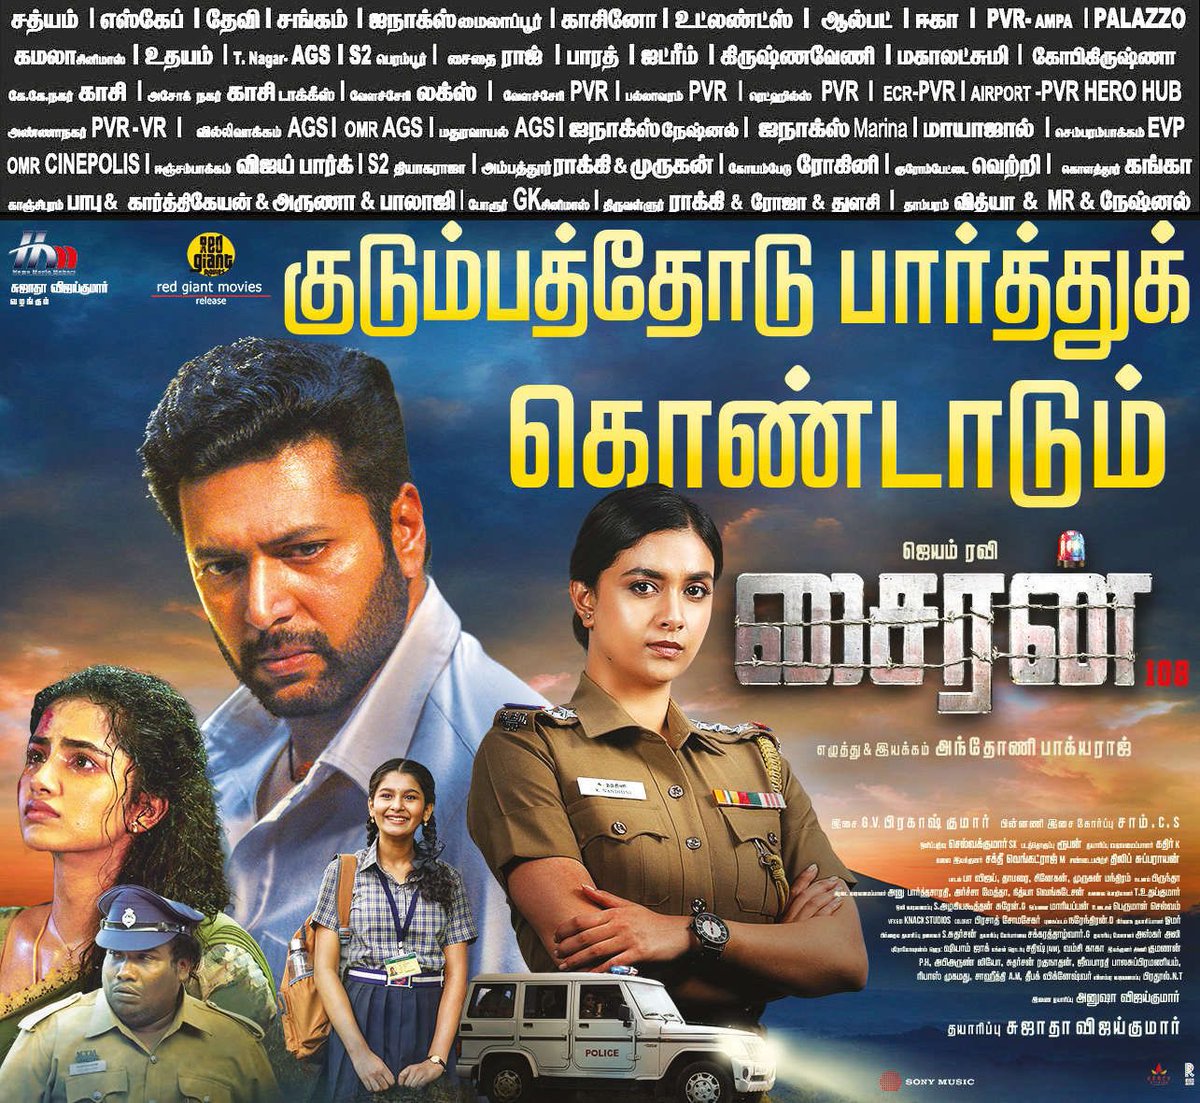 With the great response from Family audience @actor_jayamravi's #Siren is now running successfully in theatres !! TN theatrical release by @RedGiantMovies_ A @gvprakash Musical Written & Directed by @antonybhagyaraj @KeerthyOfficial @anupamahere @SamCSmusic @sujataa_HMM